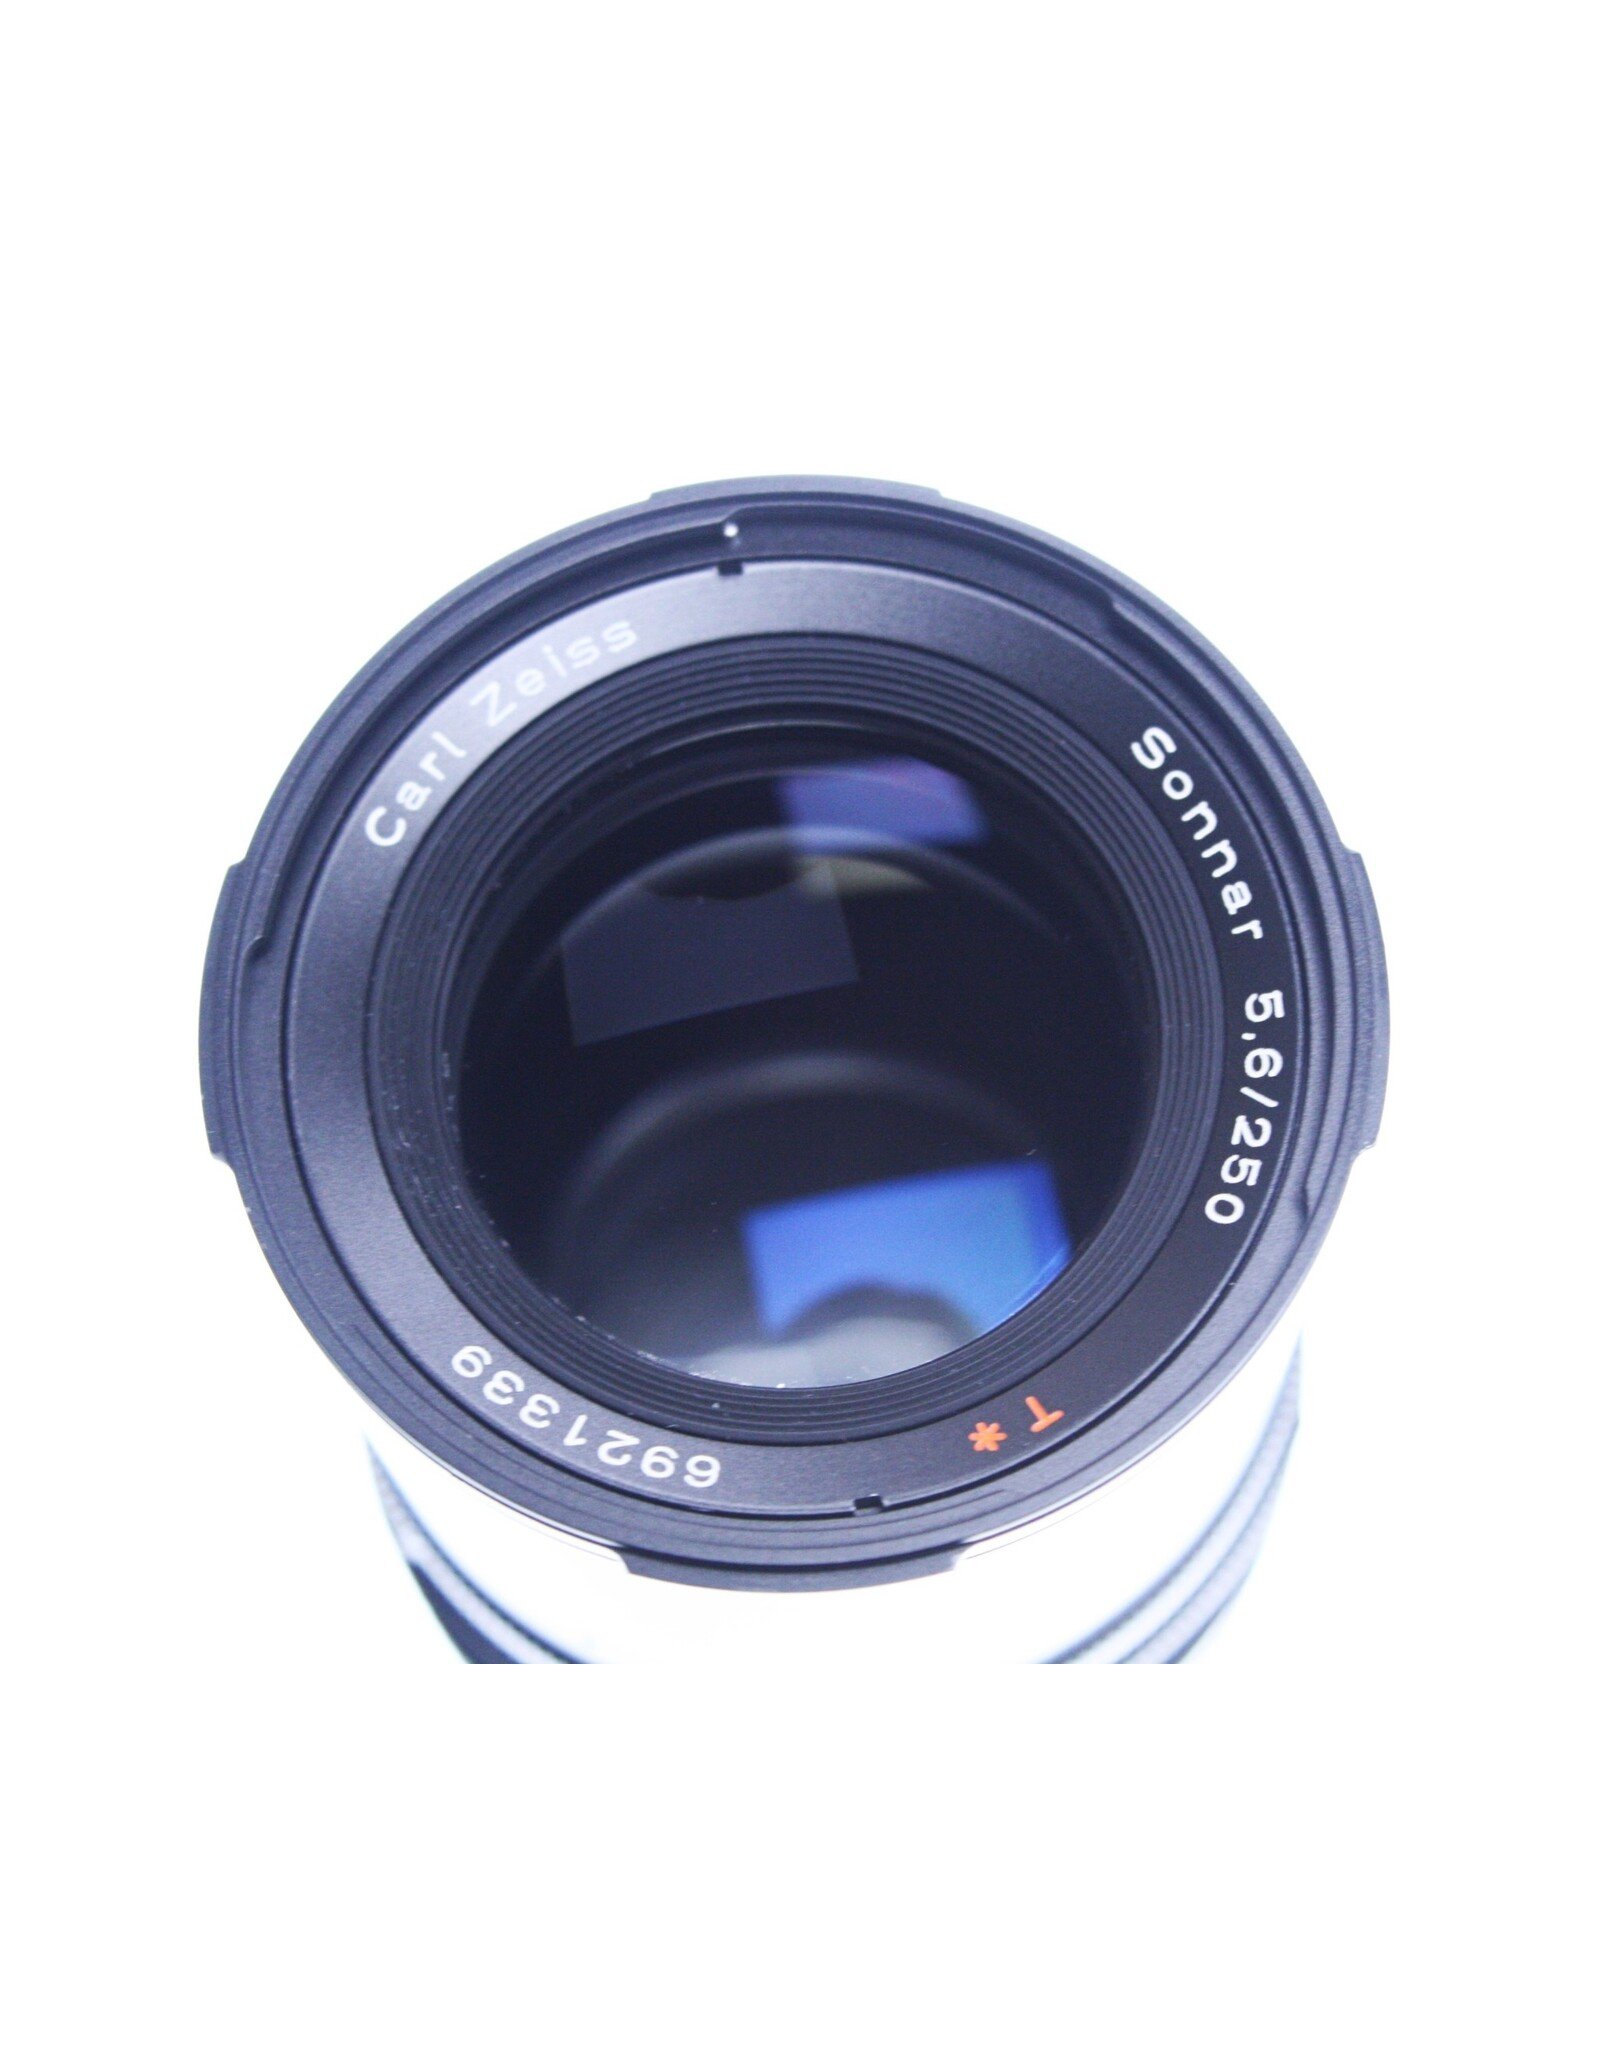 Carl Zeiss Hasselblad Carl Zeiss Sonnar f/5.6 250mm T* Lens for Hasselblad Cameras (Pre-Owned)